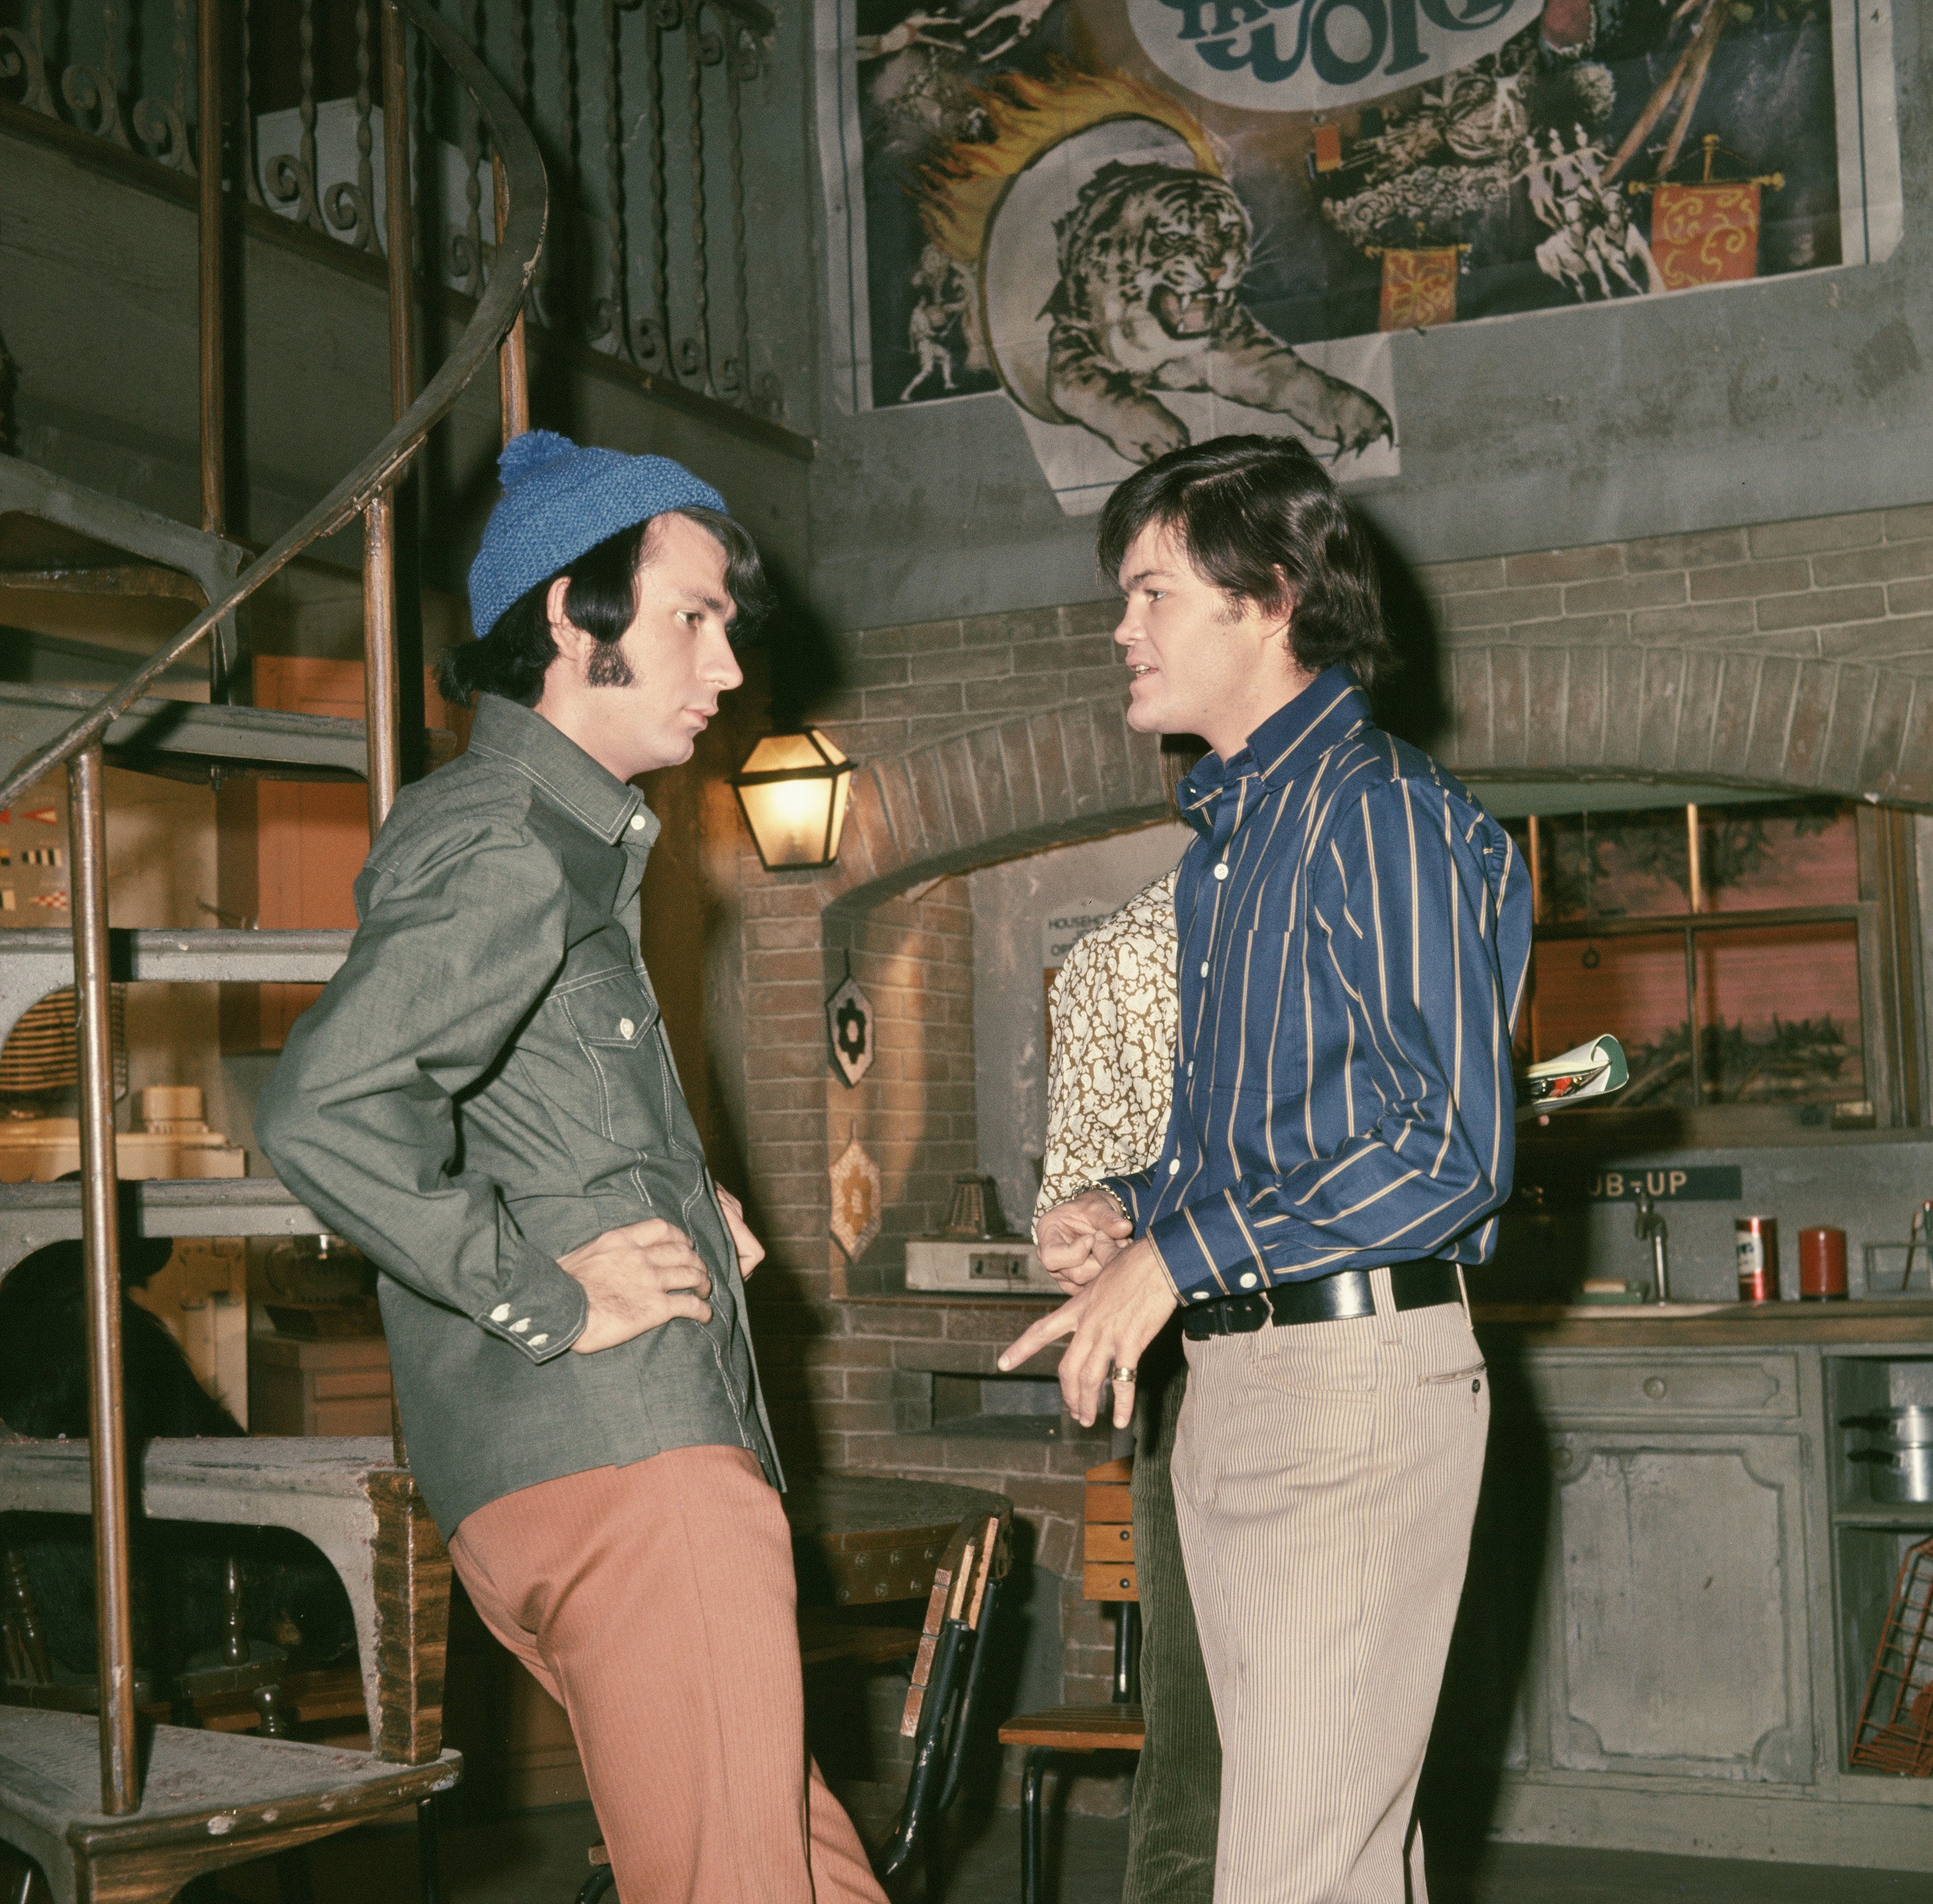 The Monkees' Mike Nesmith and Micky Dolenz standing facing each other and talking